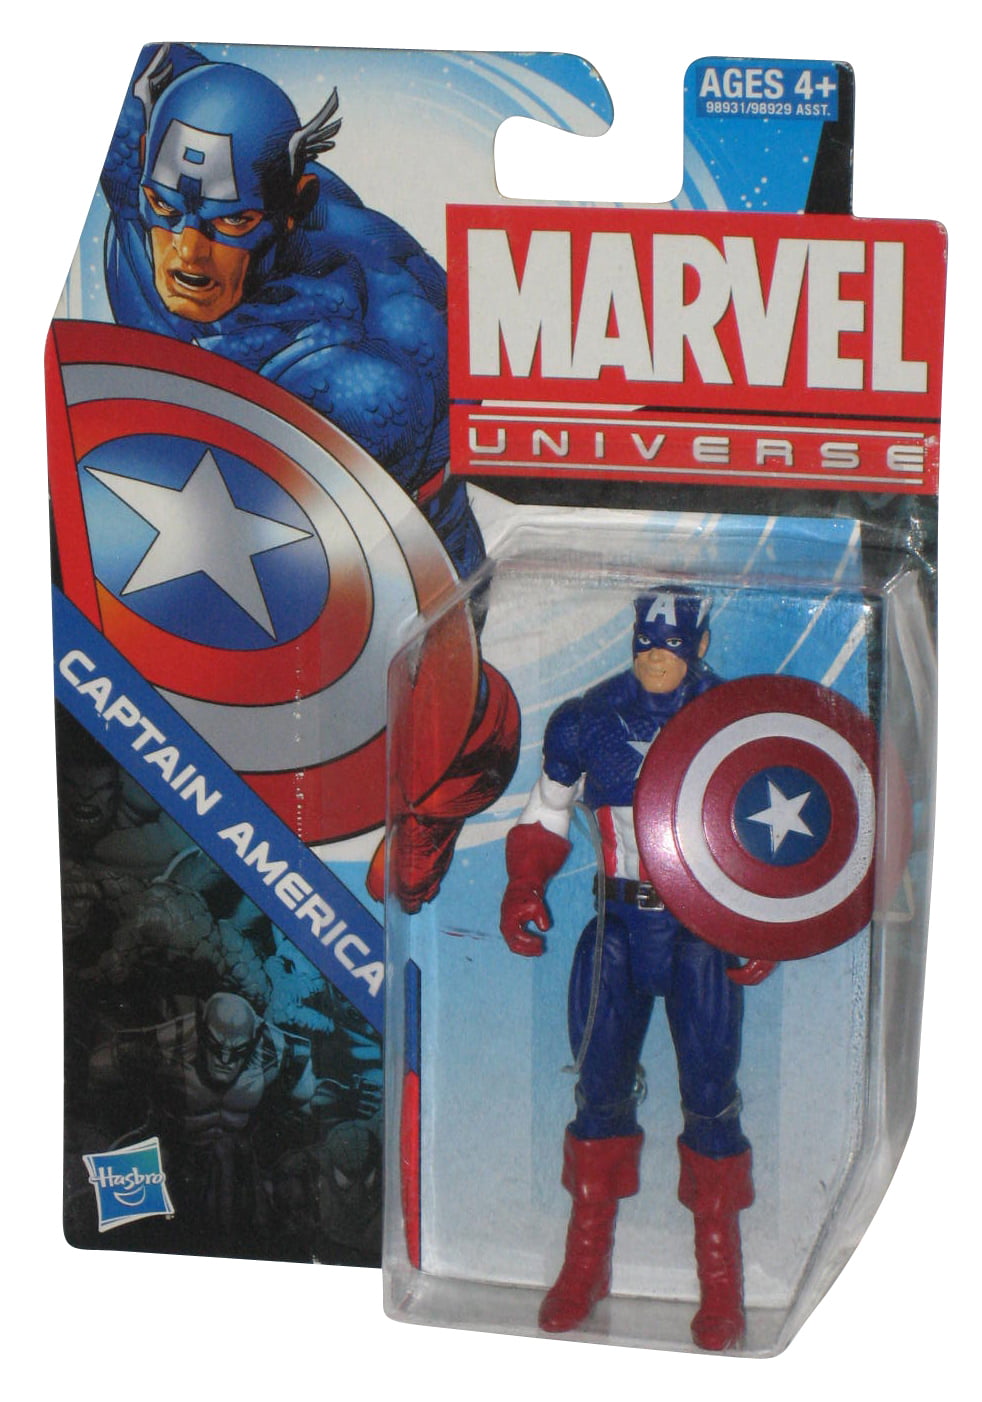 Marvel Universe Captain America Action Figure 4 Inch Hasbro 2011 for sale online 